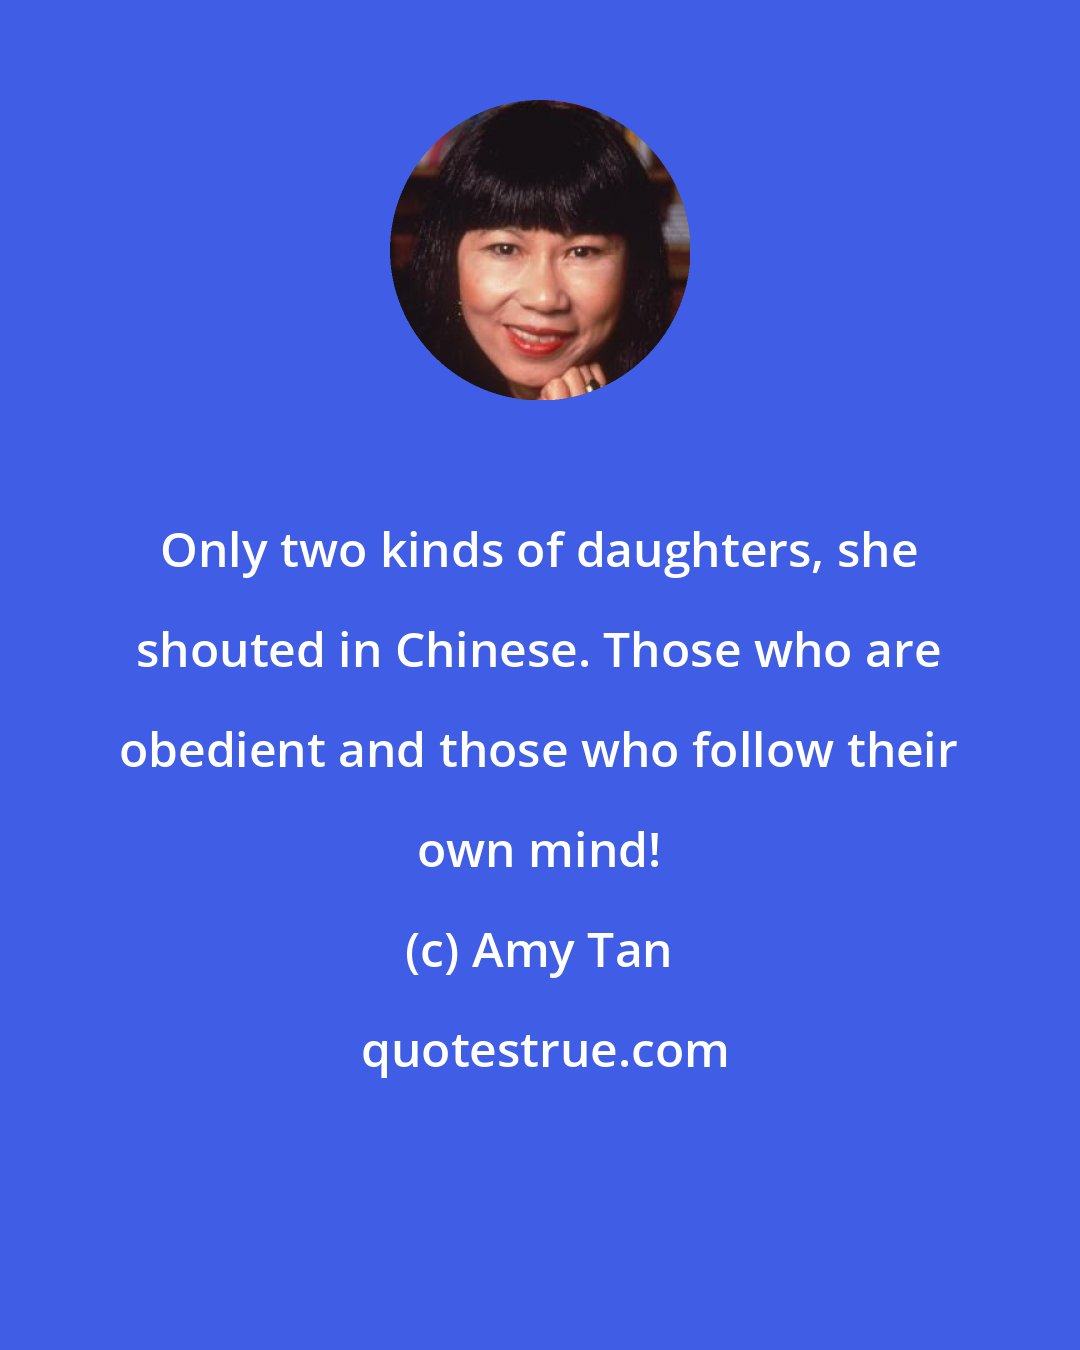 Amy Tan: Only two kinds of daughters, she shouted in Chinese. Those who are obedient and those who follow their own mind!